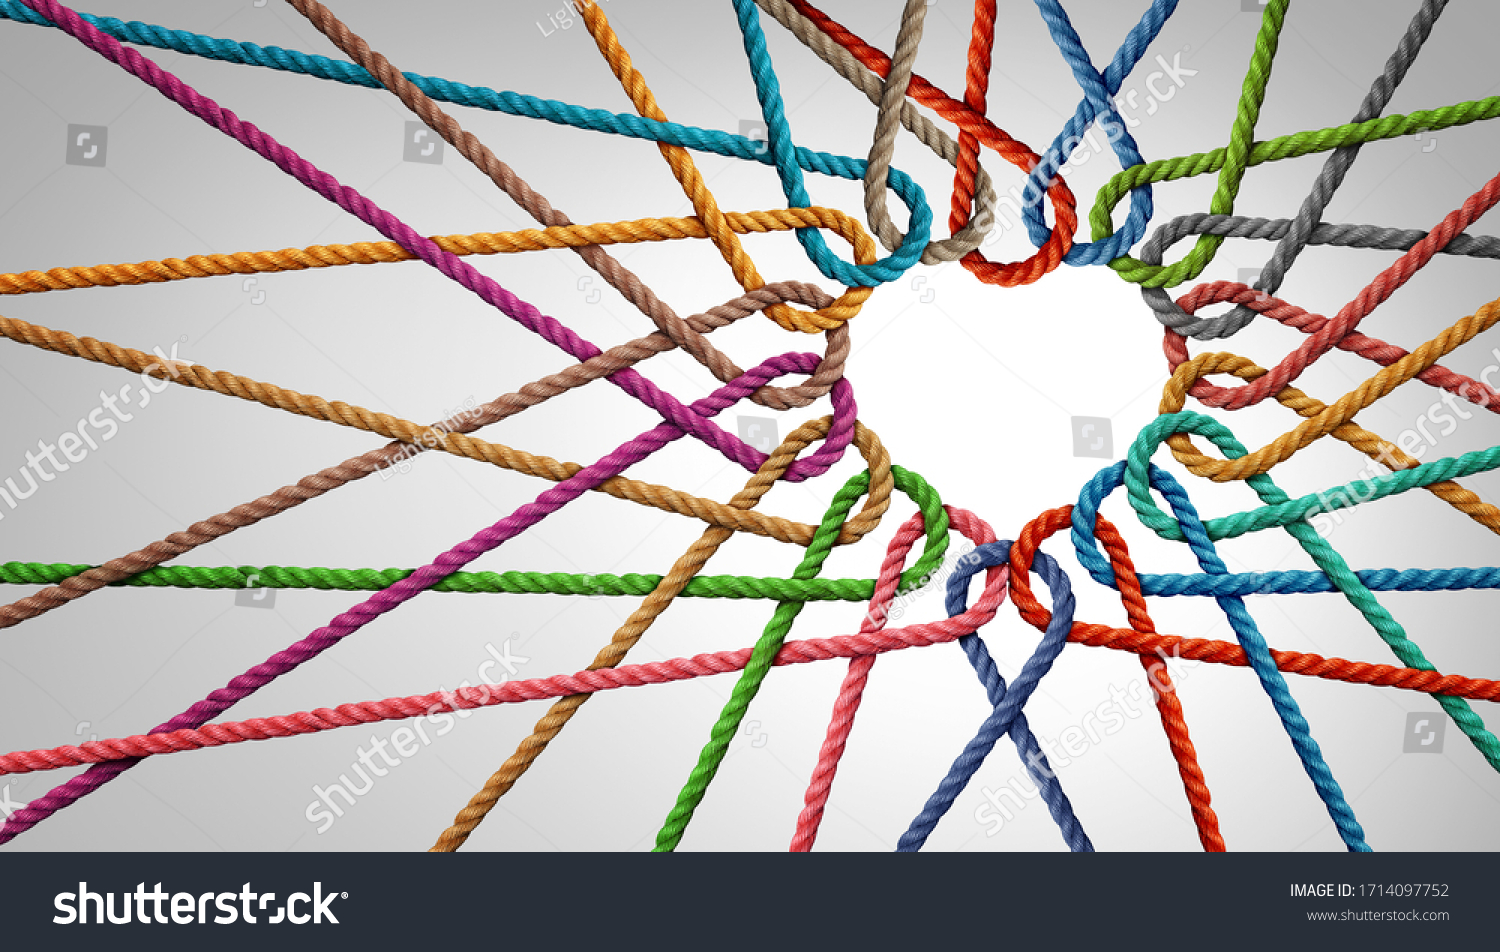 Unity and love partnership as ropes shaped as a heart in a group of diverse strings connected together shaped as a support symbol expressing the feeling of teamwork and togetherness. #1714097752